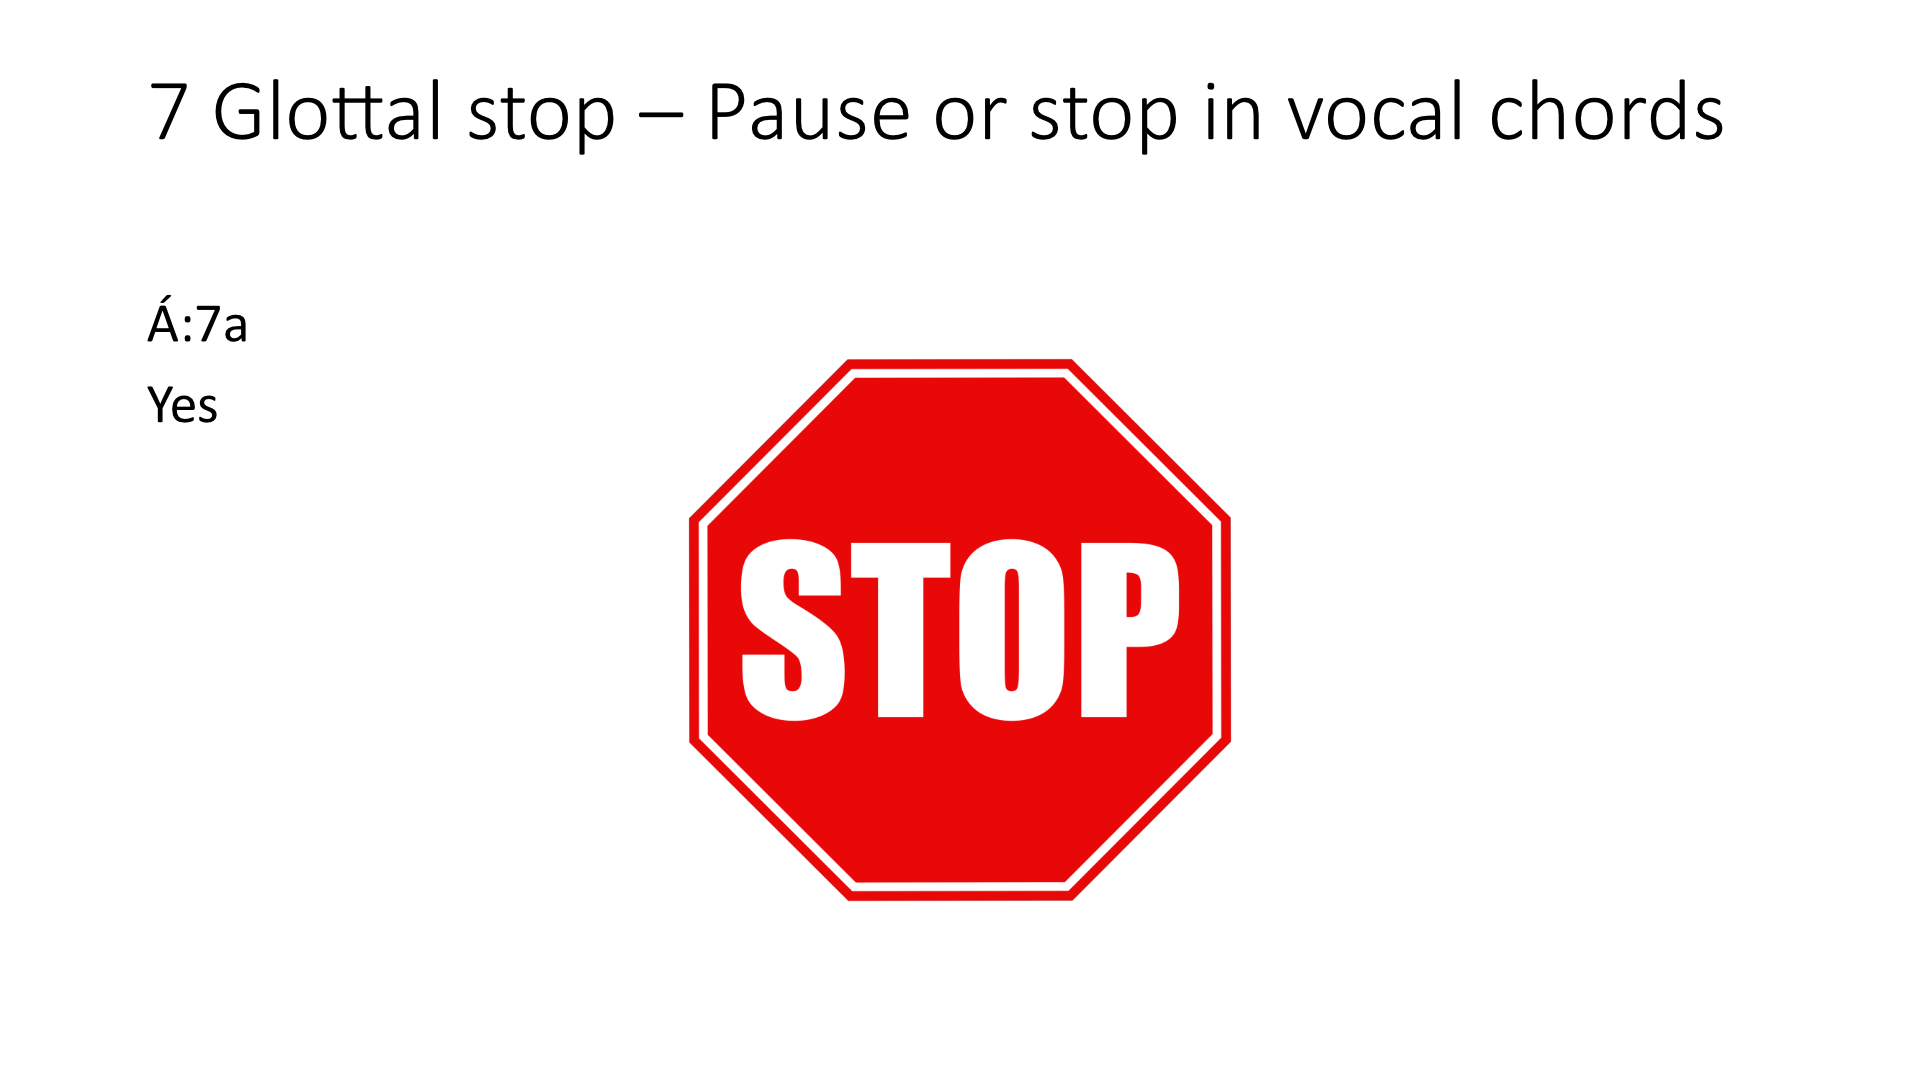 A Glottal Stop, in Samish, is represented by a 7. It's like a stop-sign for making sounds.